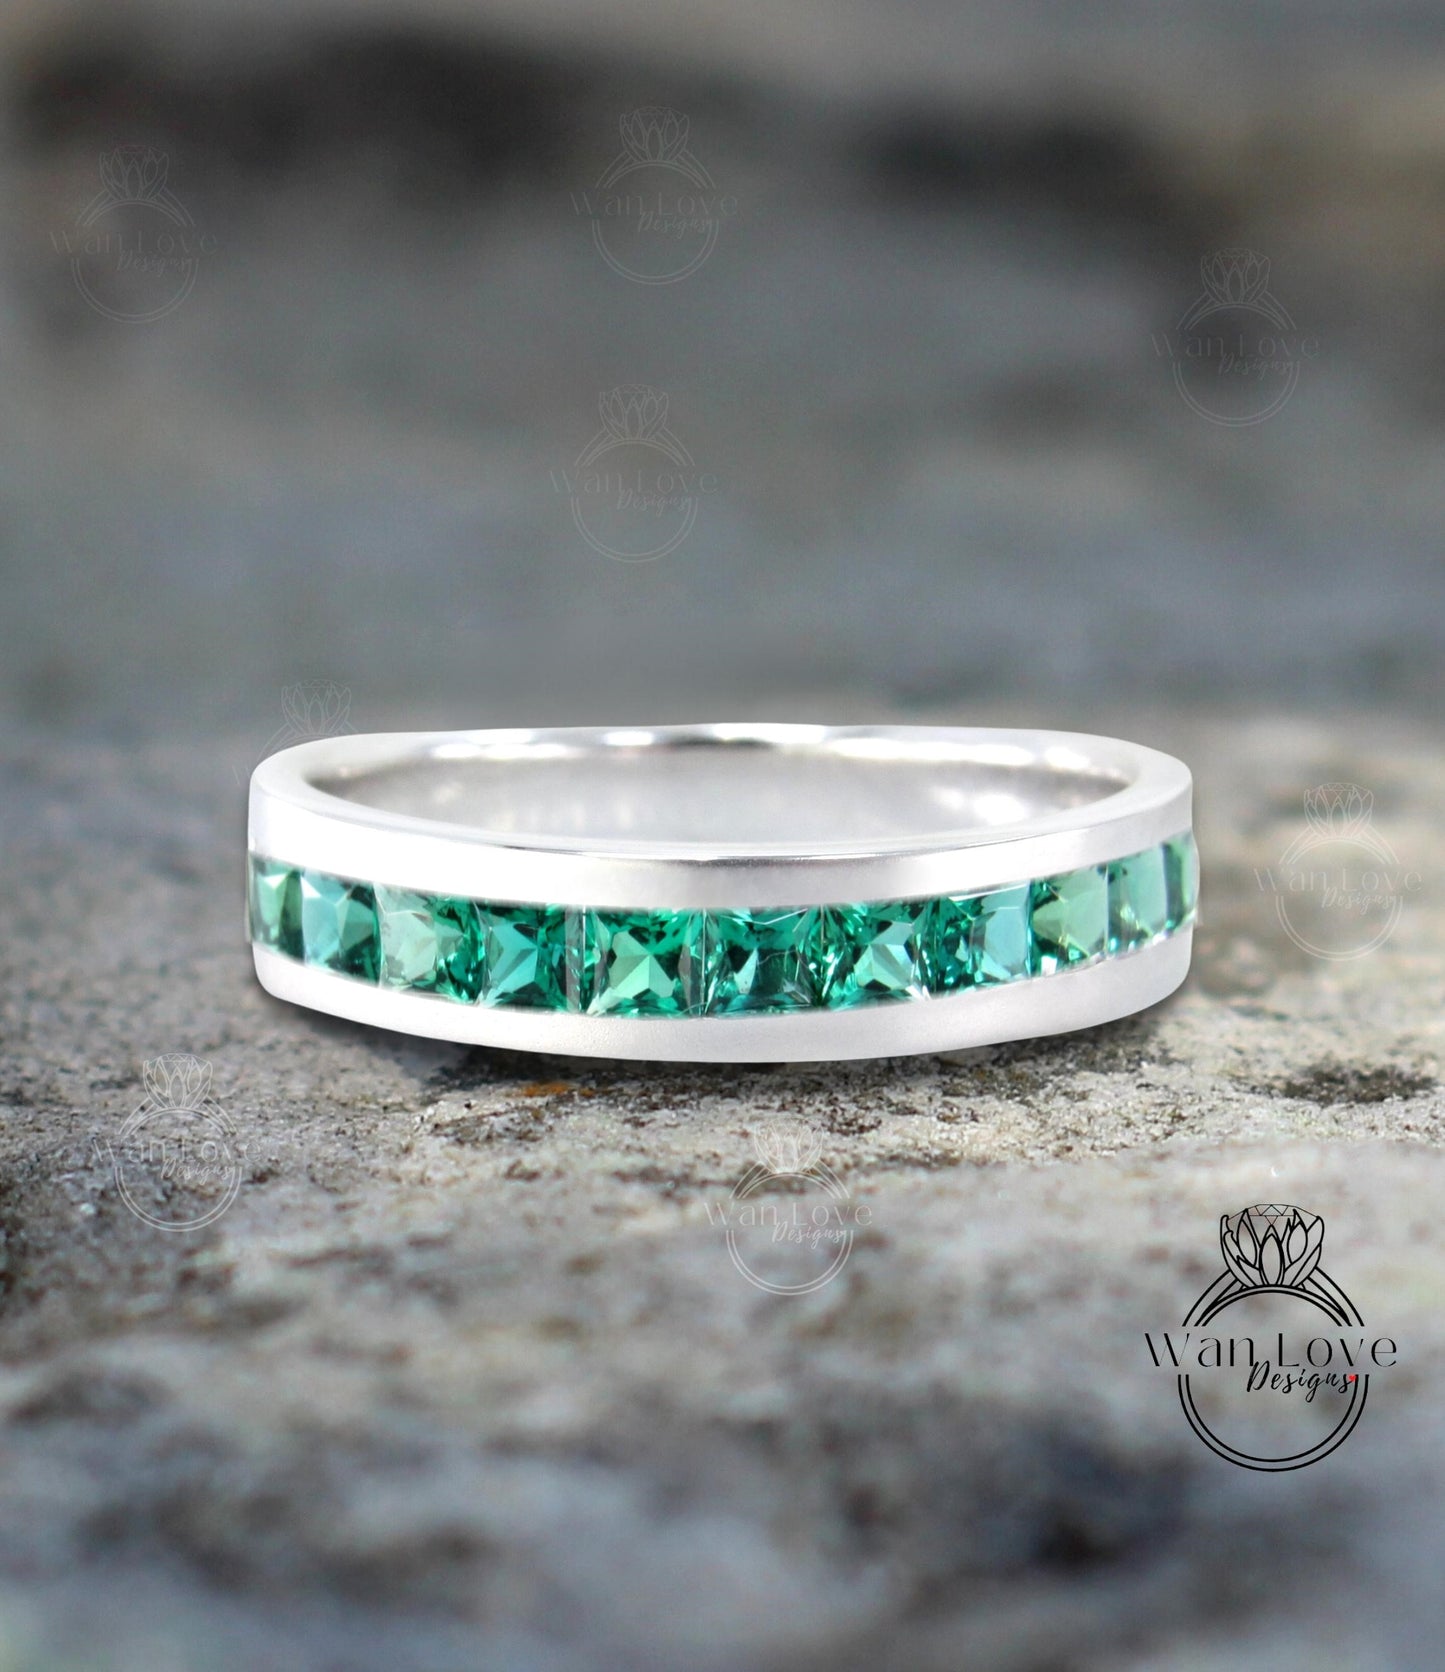 a white gold ring with green stones on it